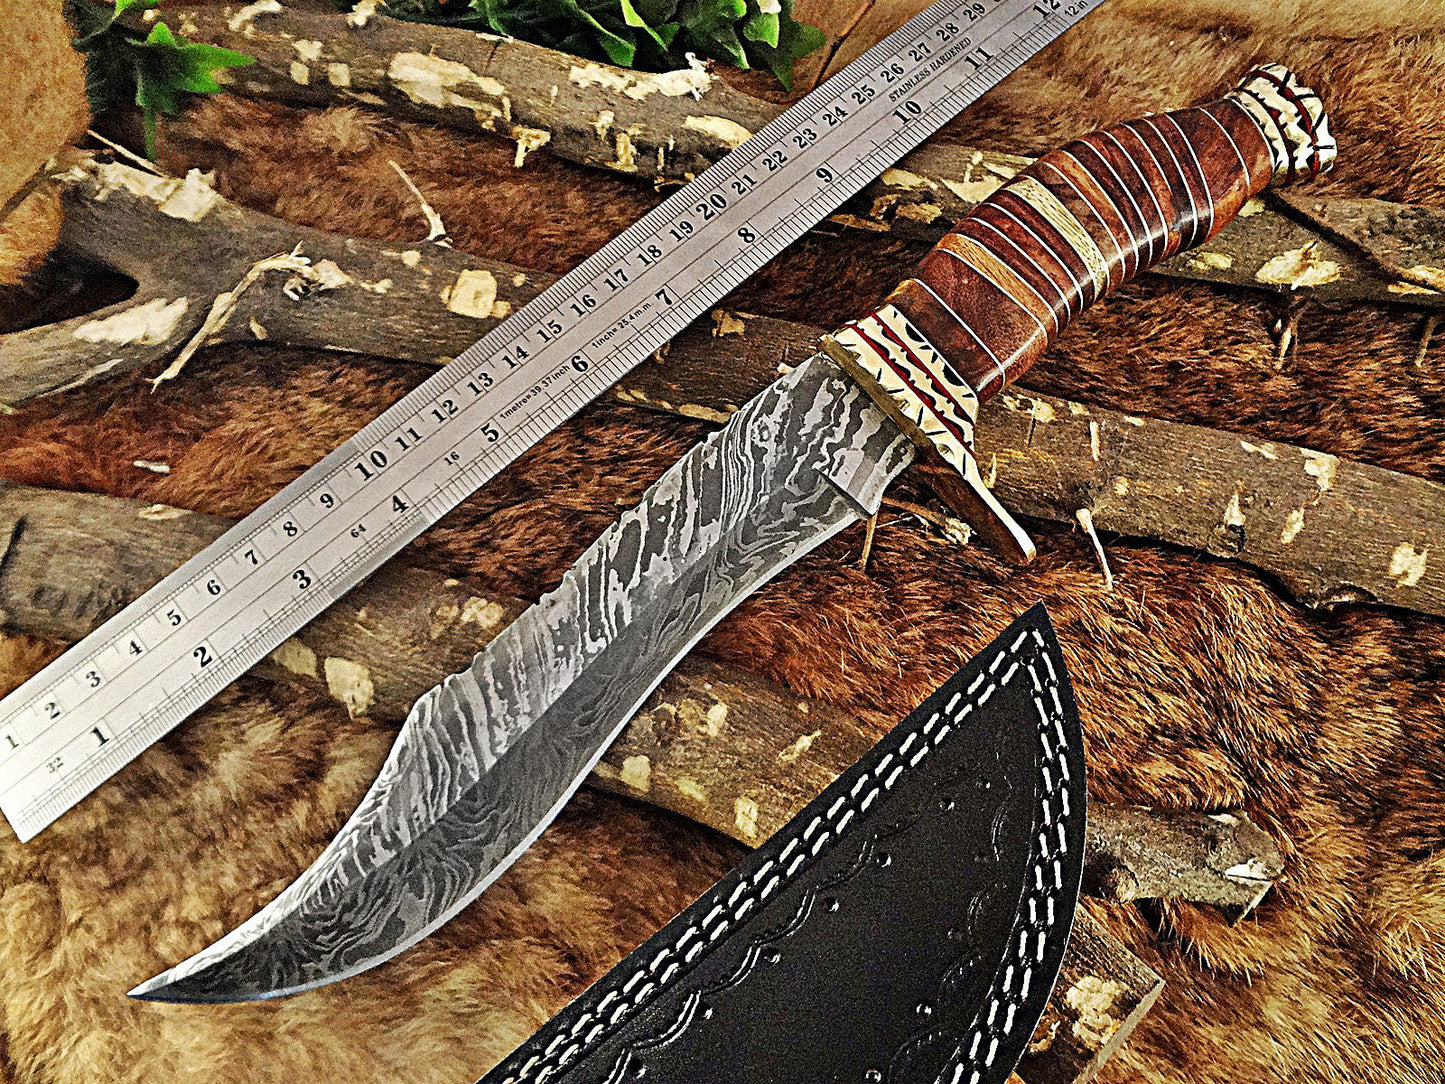 12.5" Long hand forged Damascus steel Hunting Bowie Knife, sliced Rose Wood With engraved Brass cap and finger guard, Cow Leather sheath